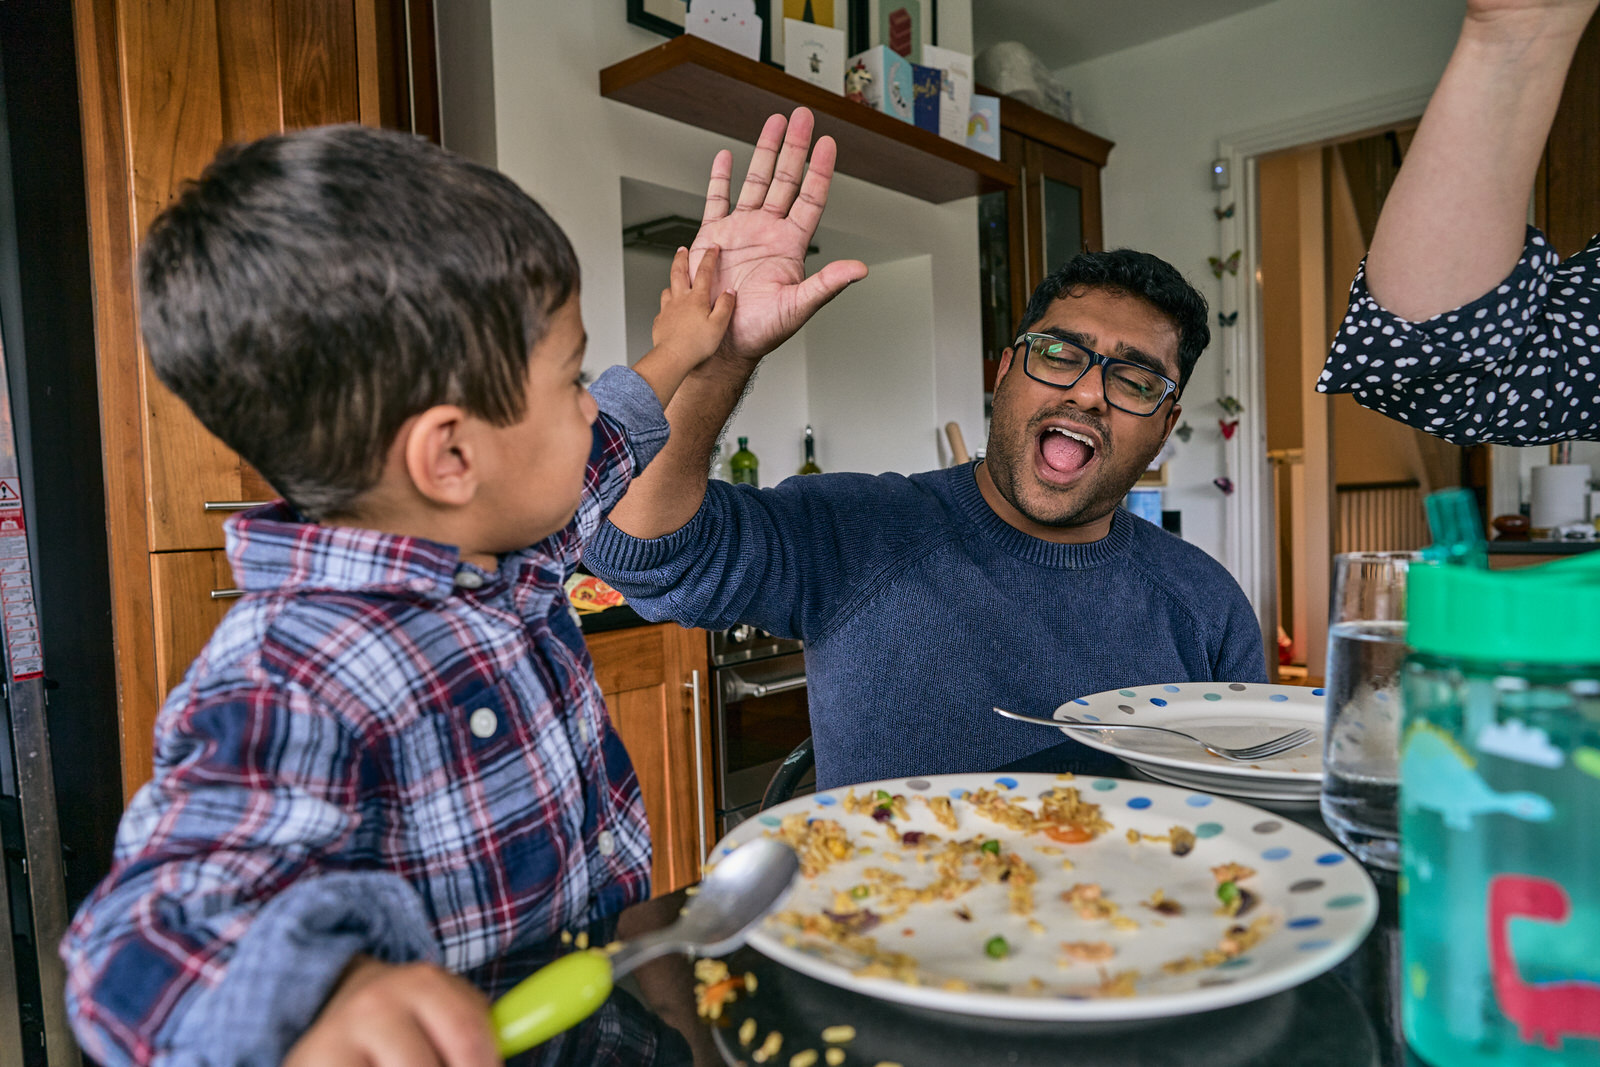 dad high fives son for eating his lunch